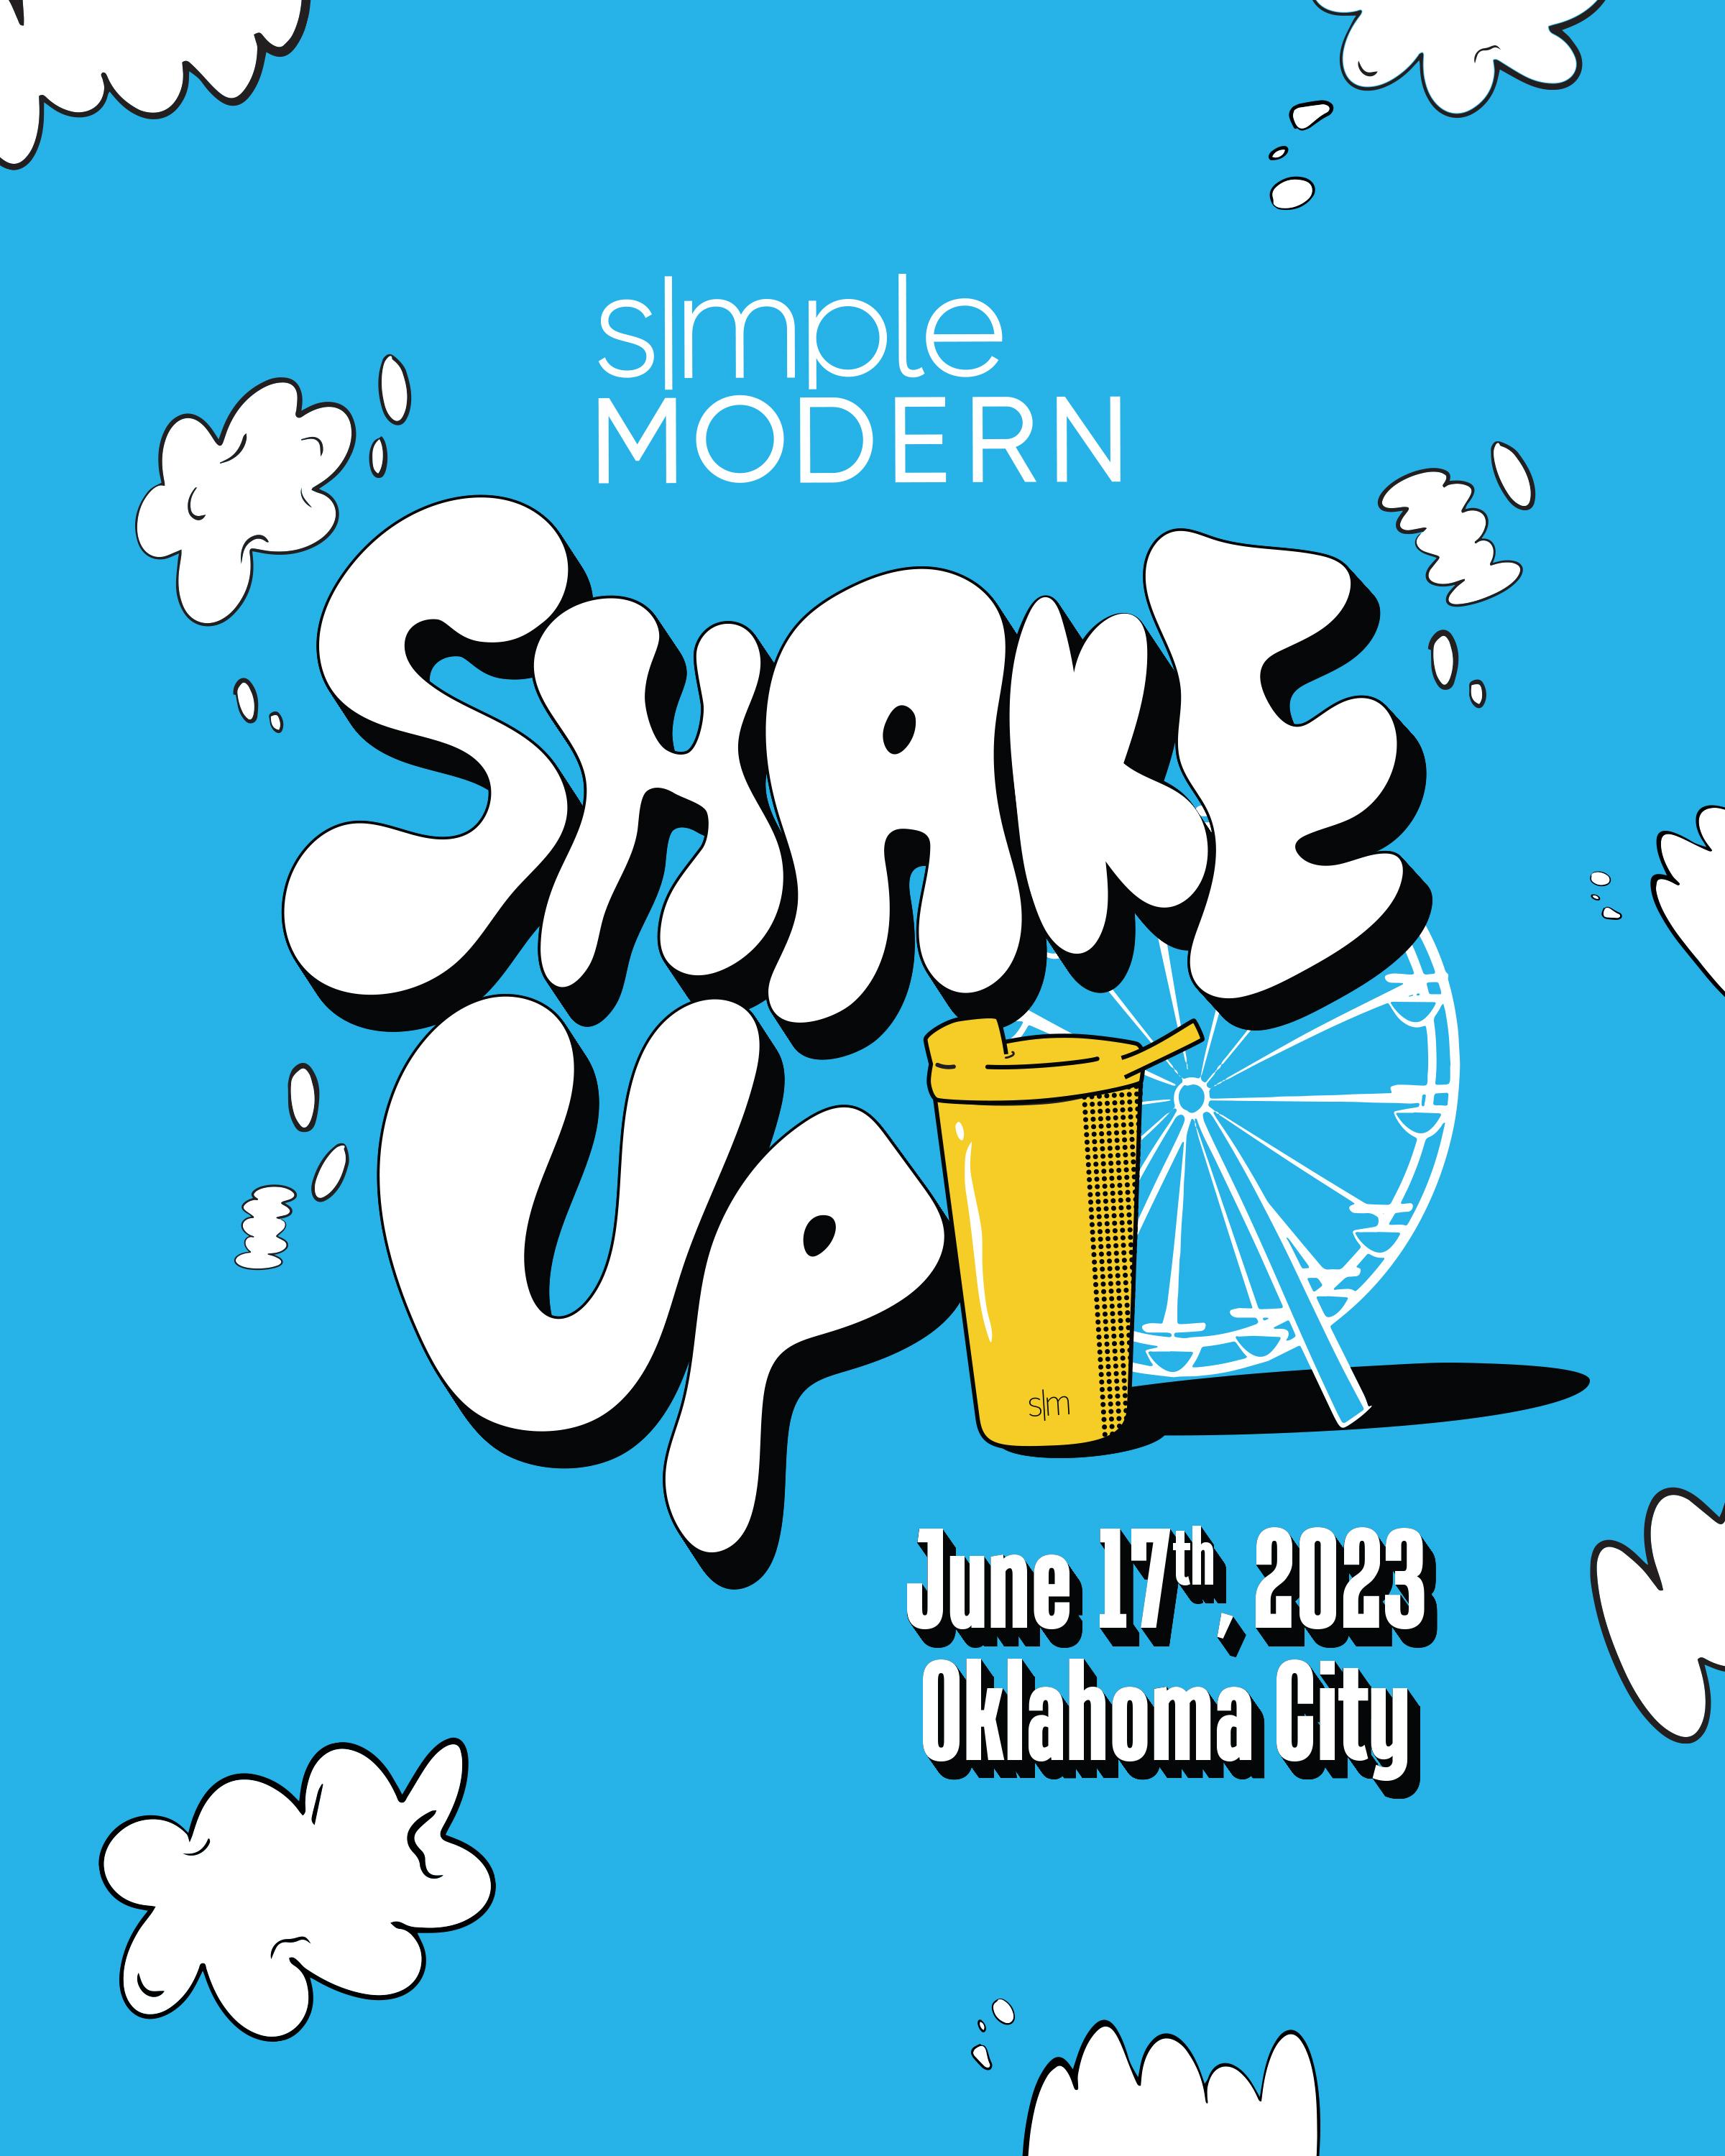 Simple Modern Shake Up: Launch Event